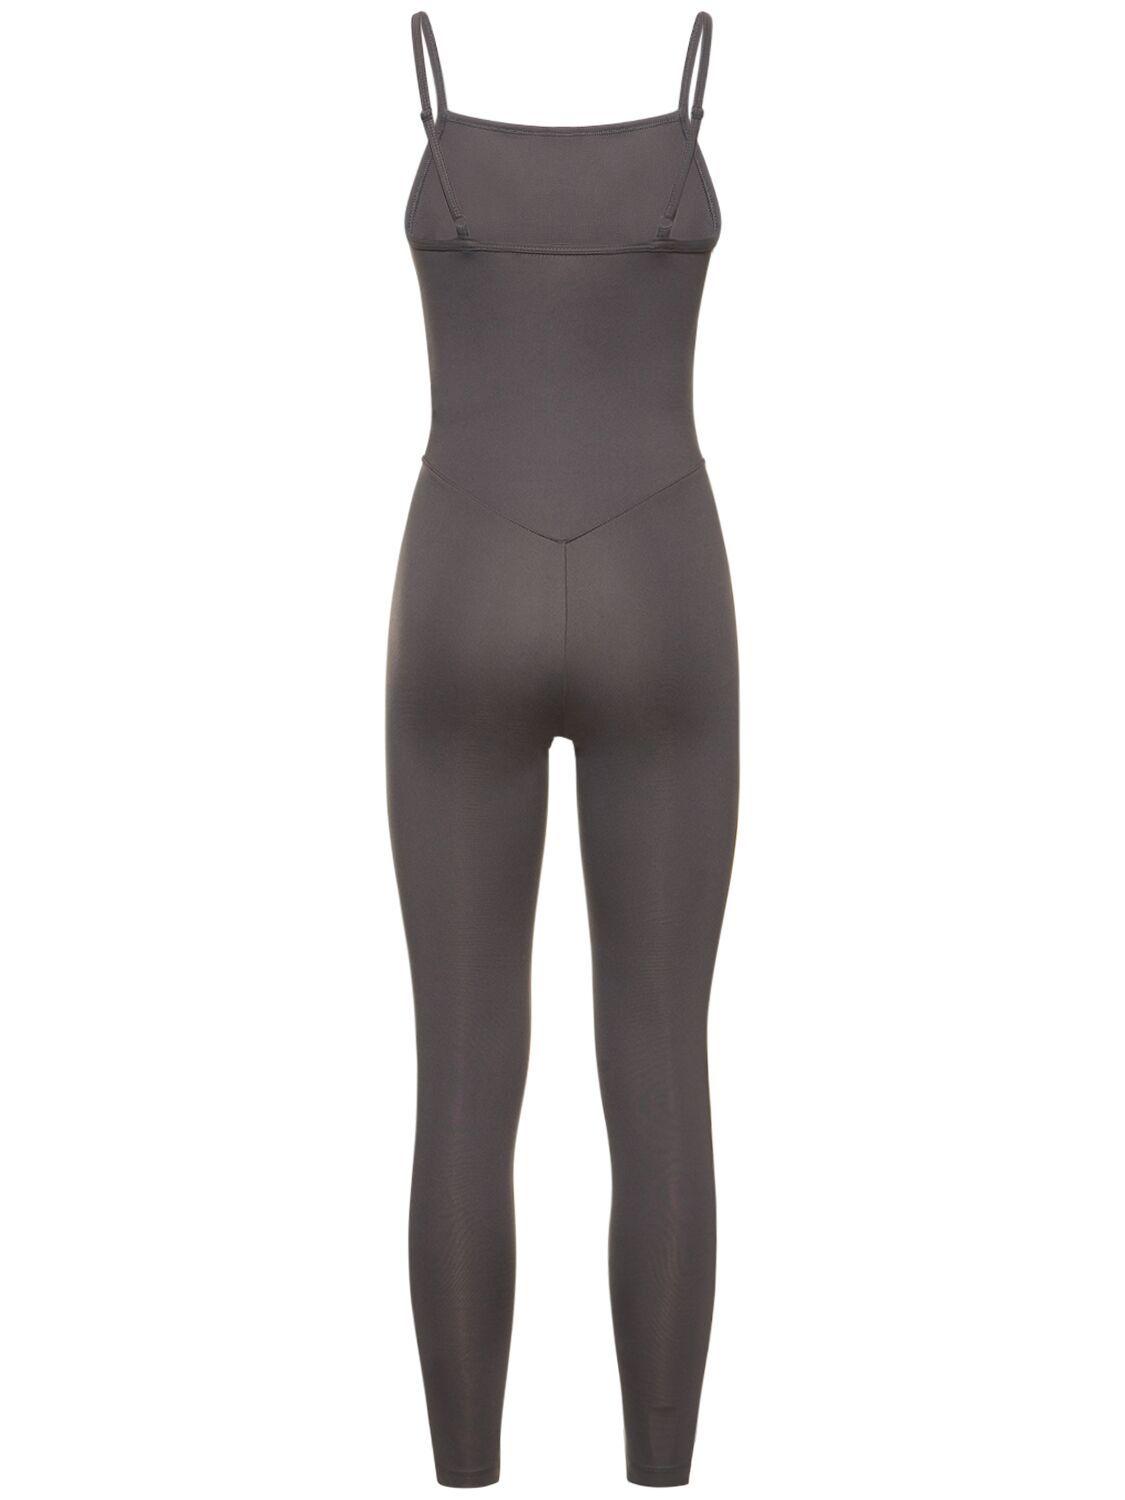 GIRLFRIEND COLLECTIVE The Unitard Jumpsuit in Gray